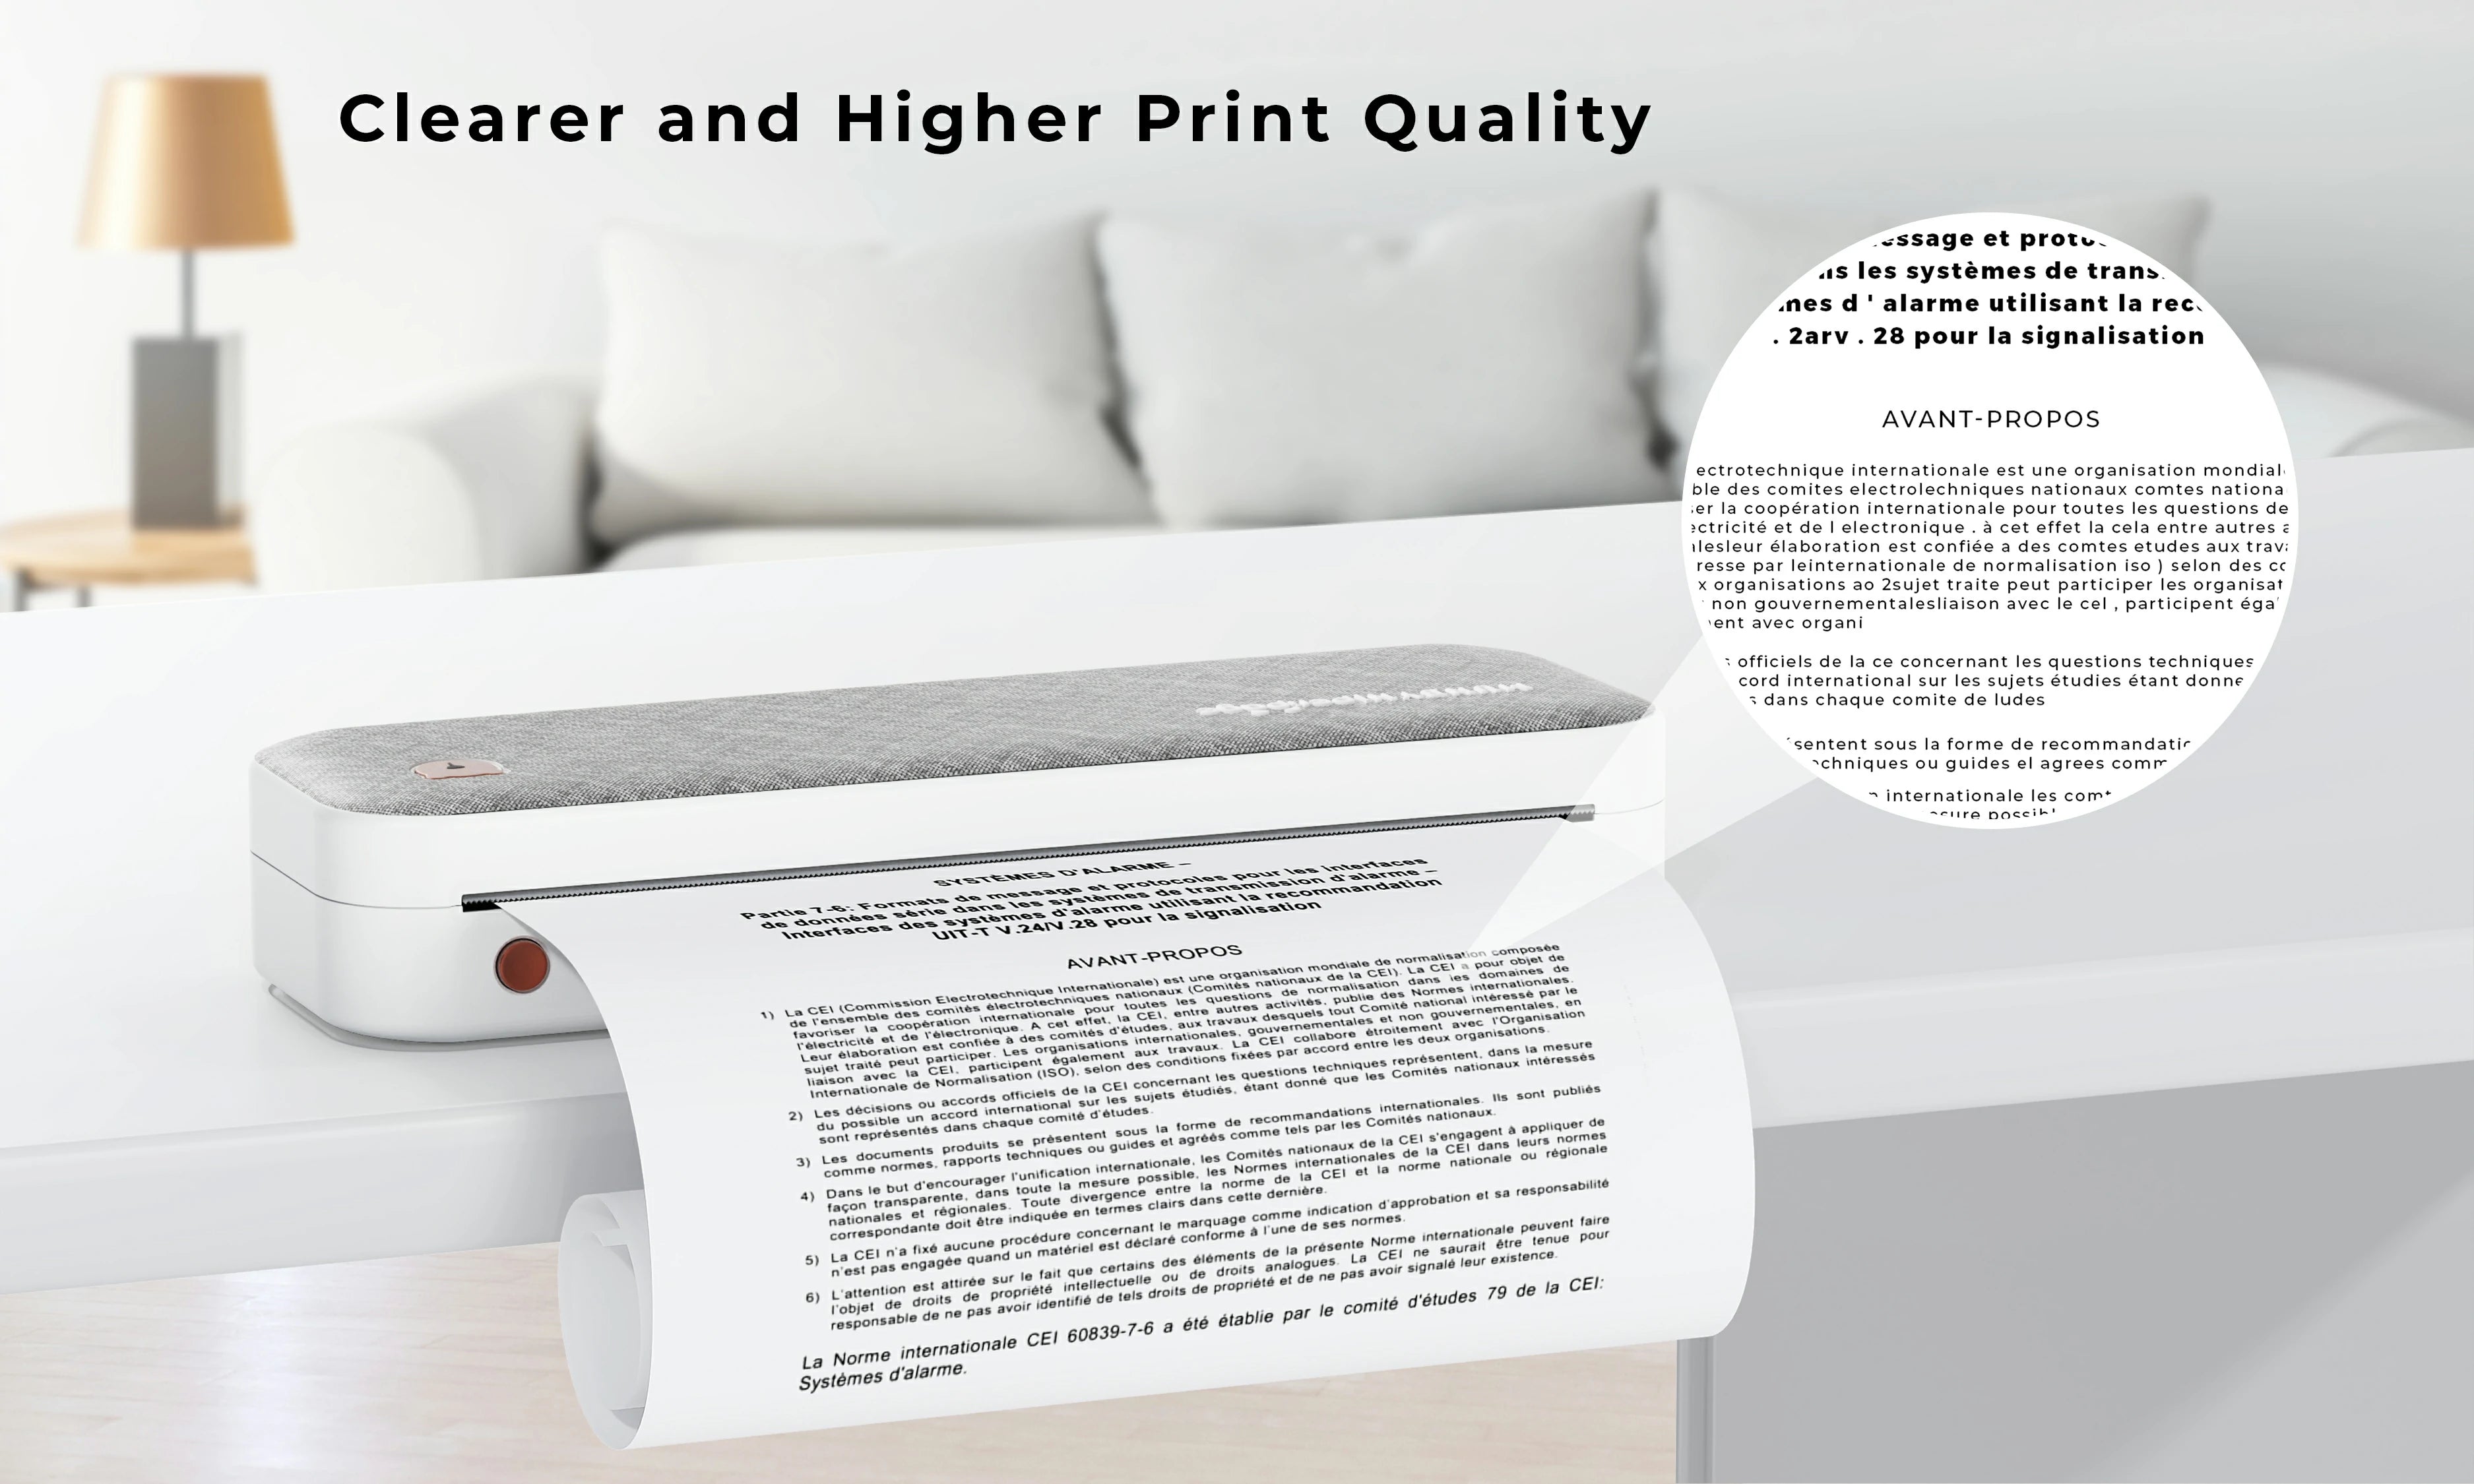 Our A4 thermal printer delivers clear, high-quality prints every time, making it an ideal choice for both personal and professional use.